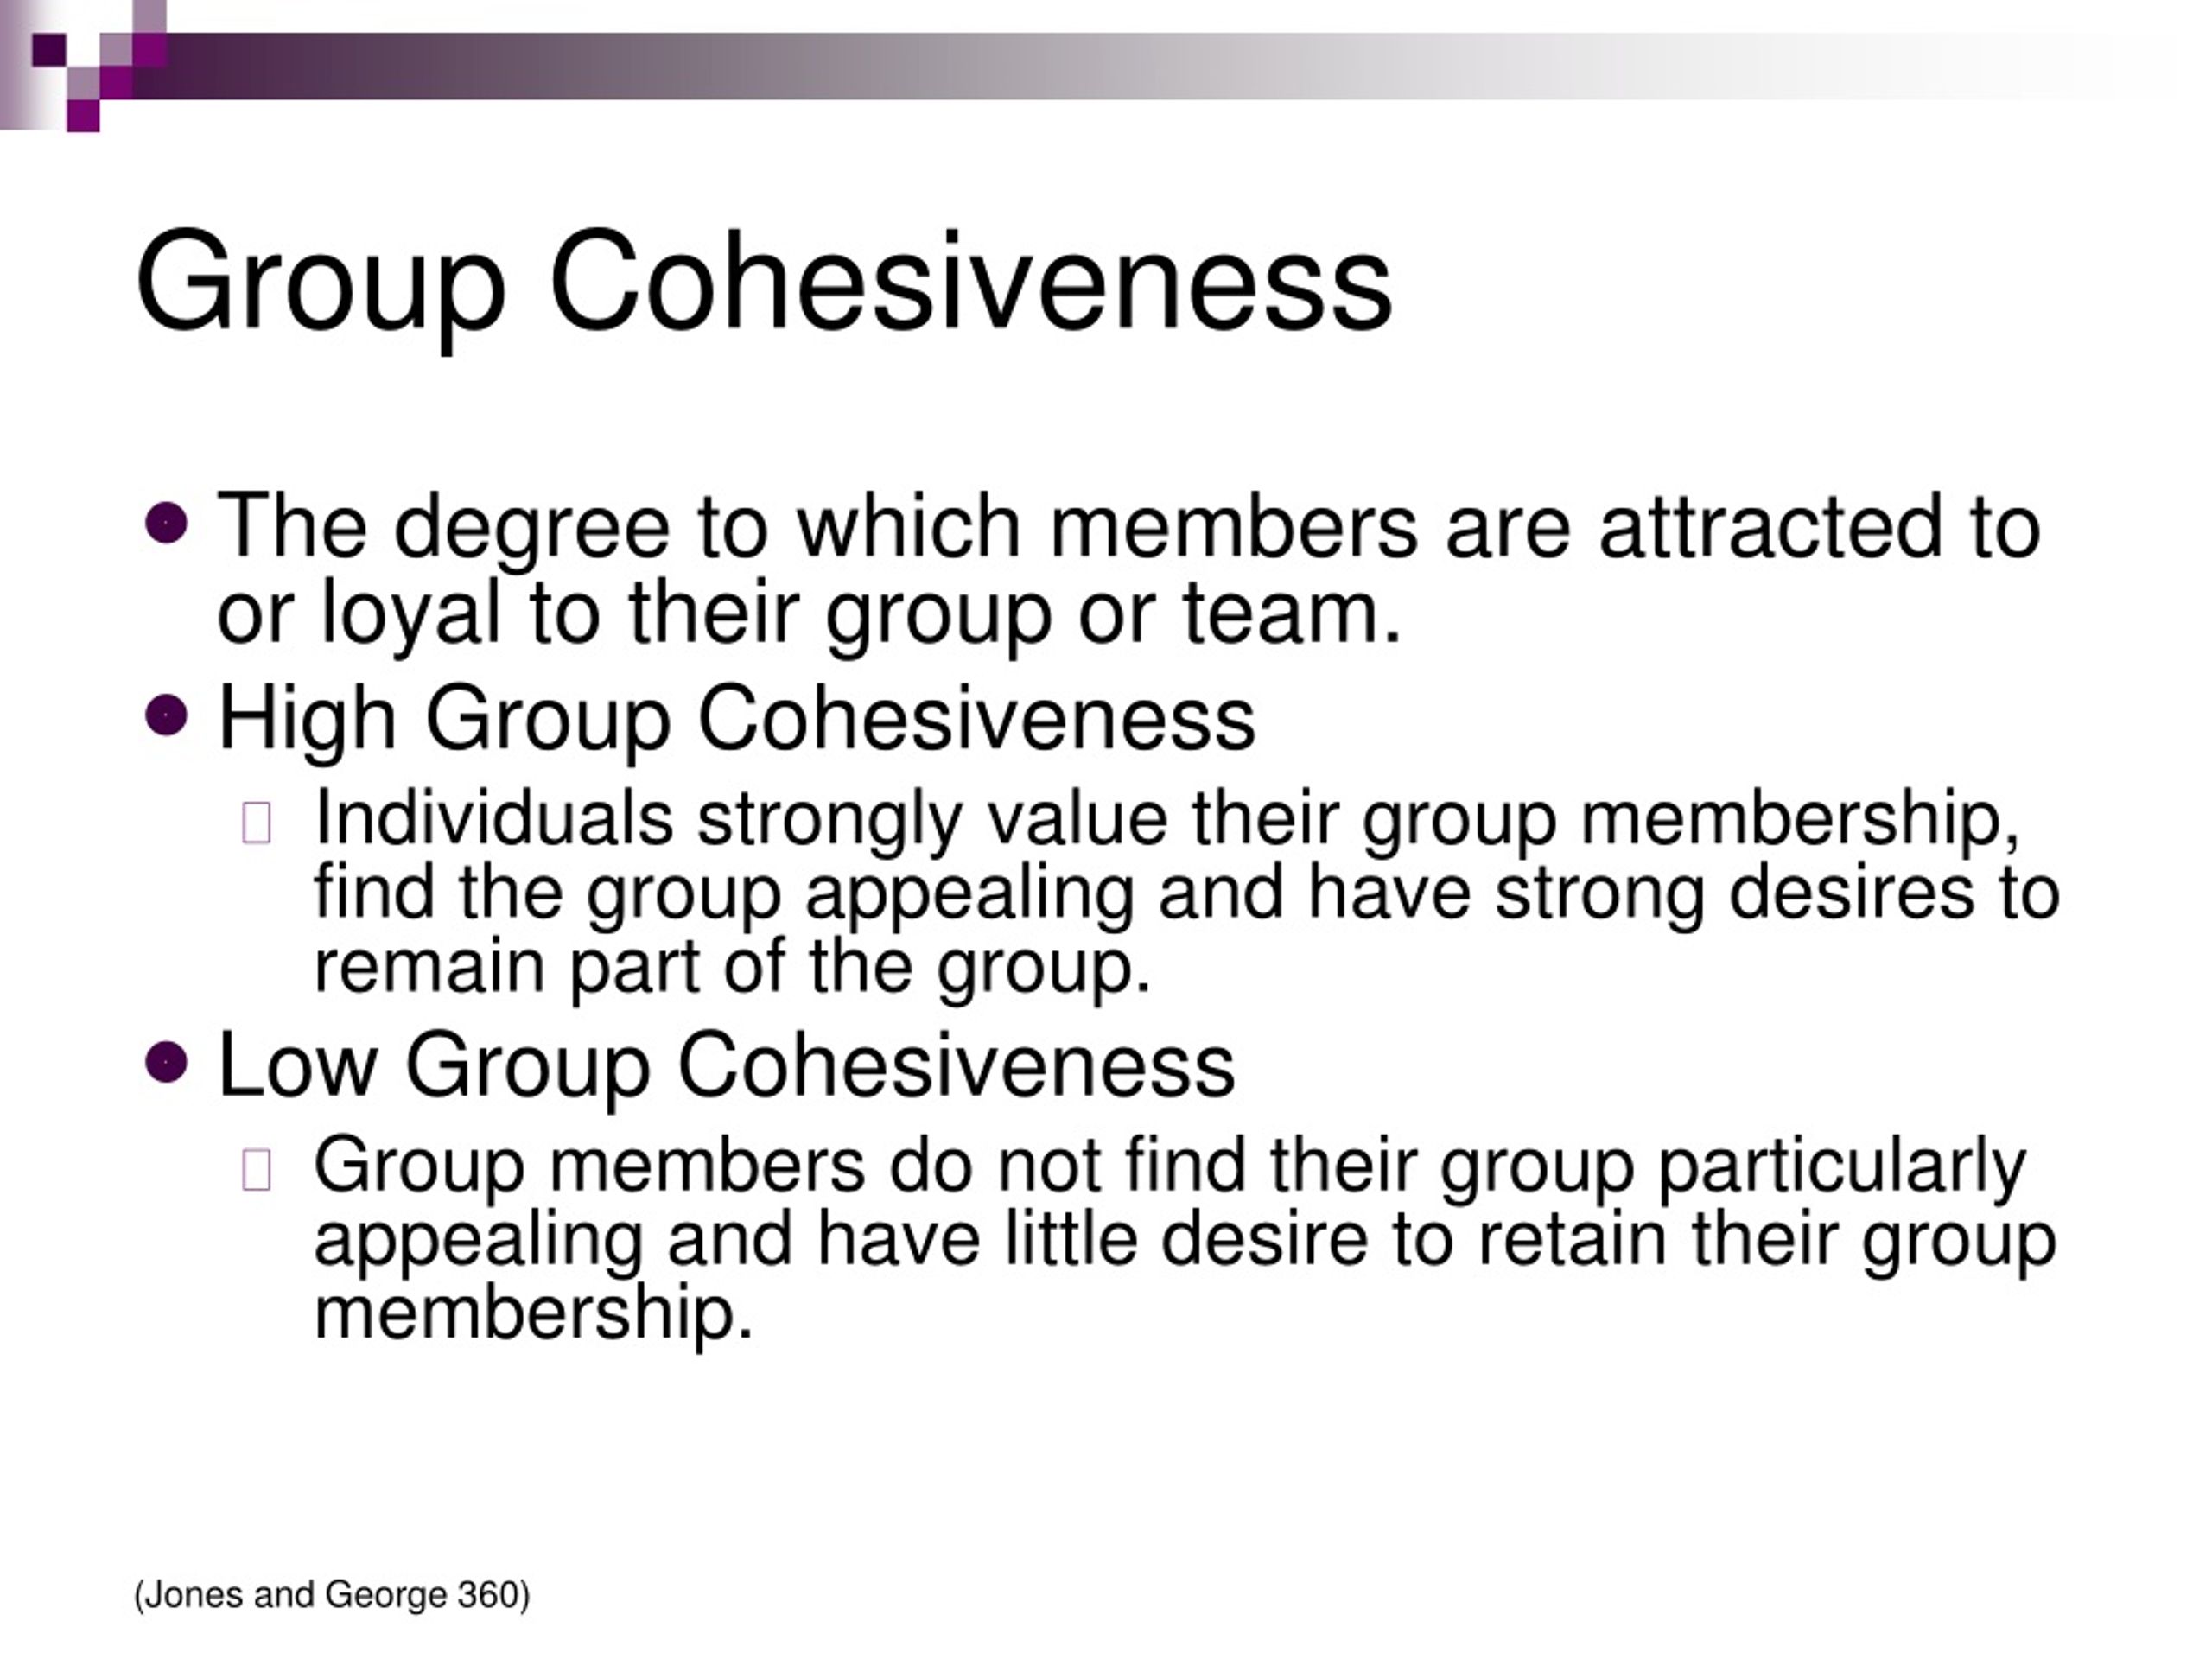 literature review on group cohesiveness